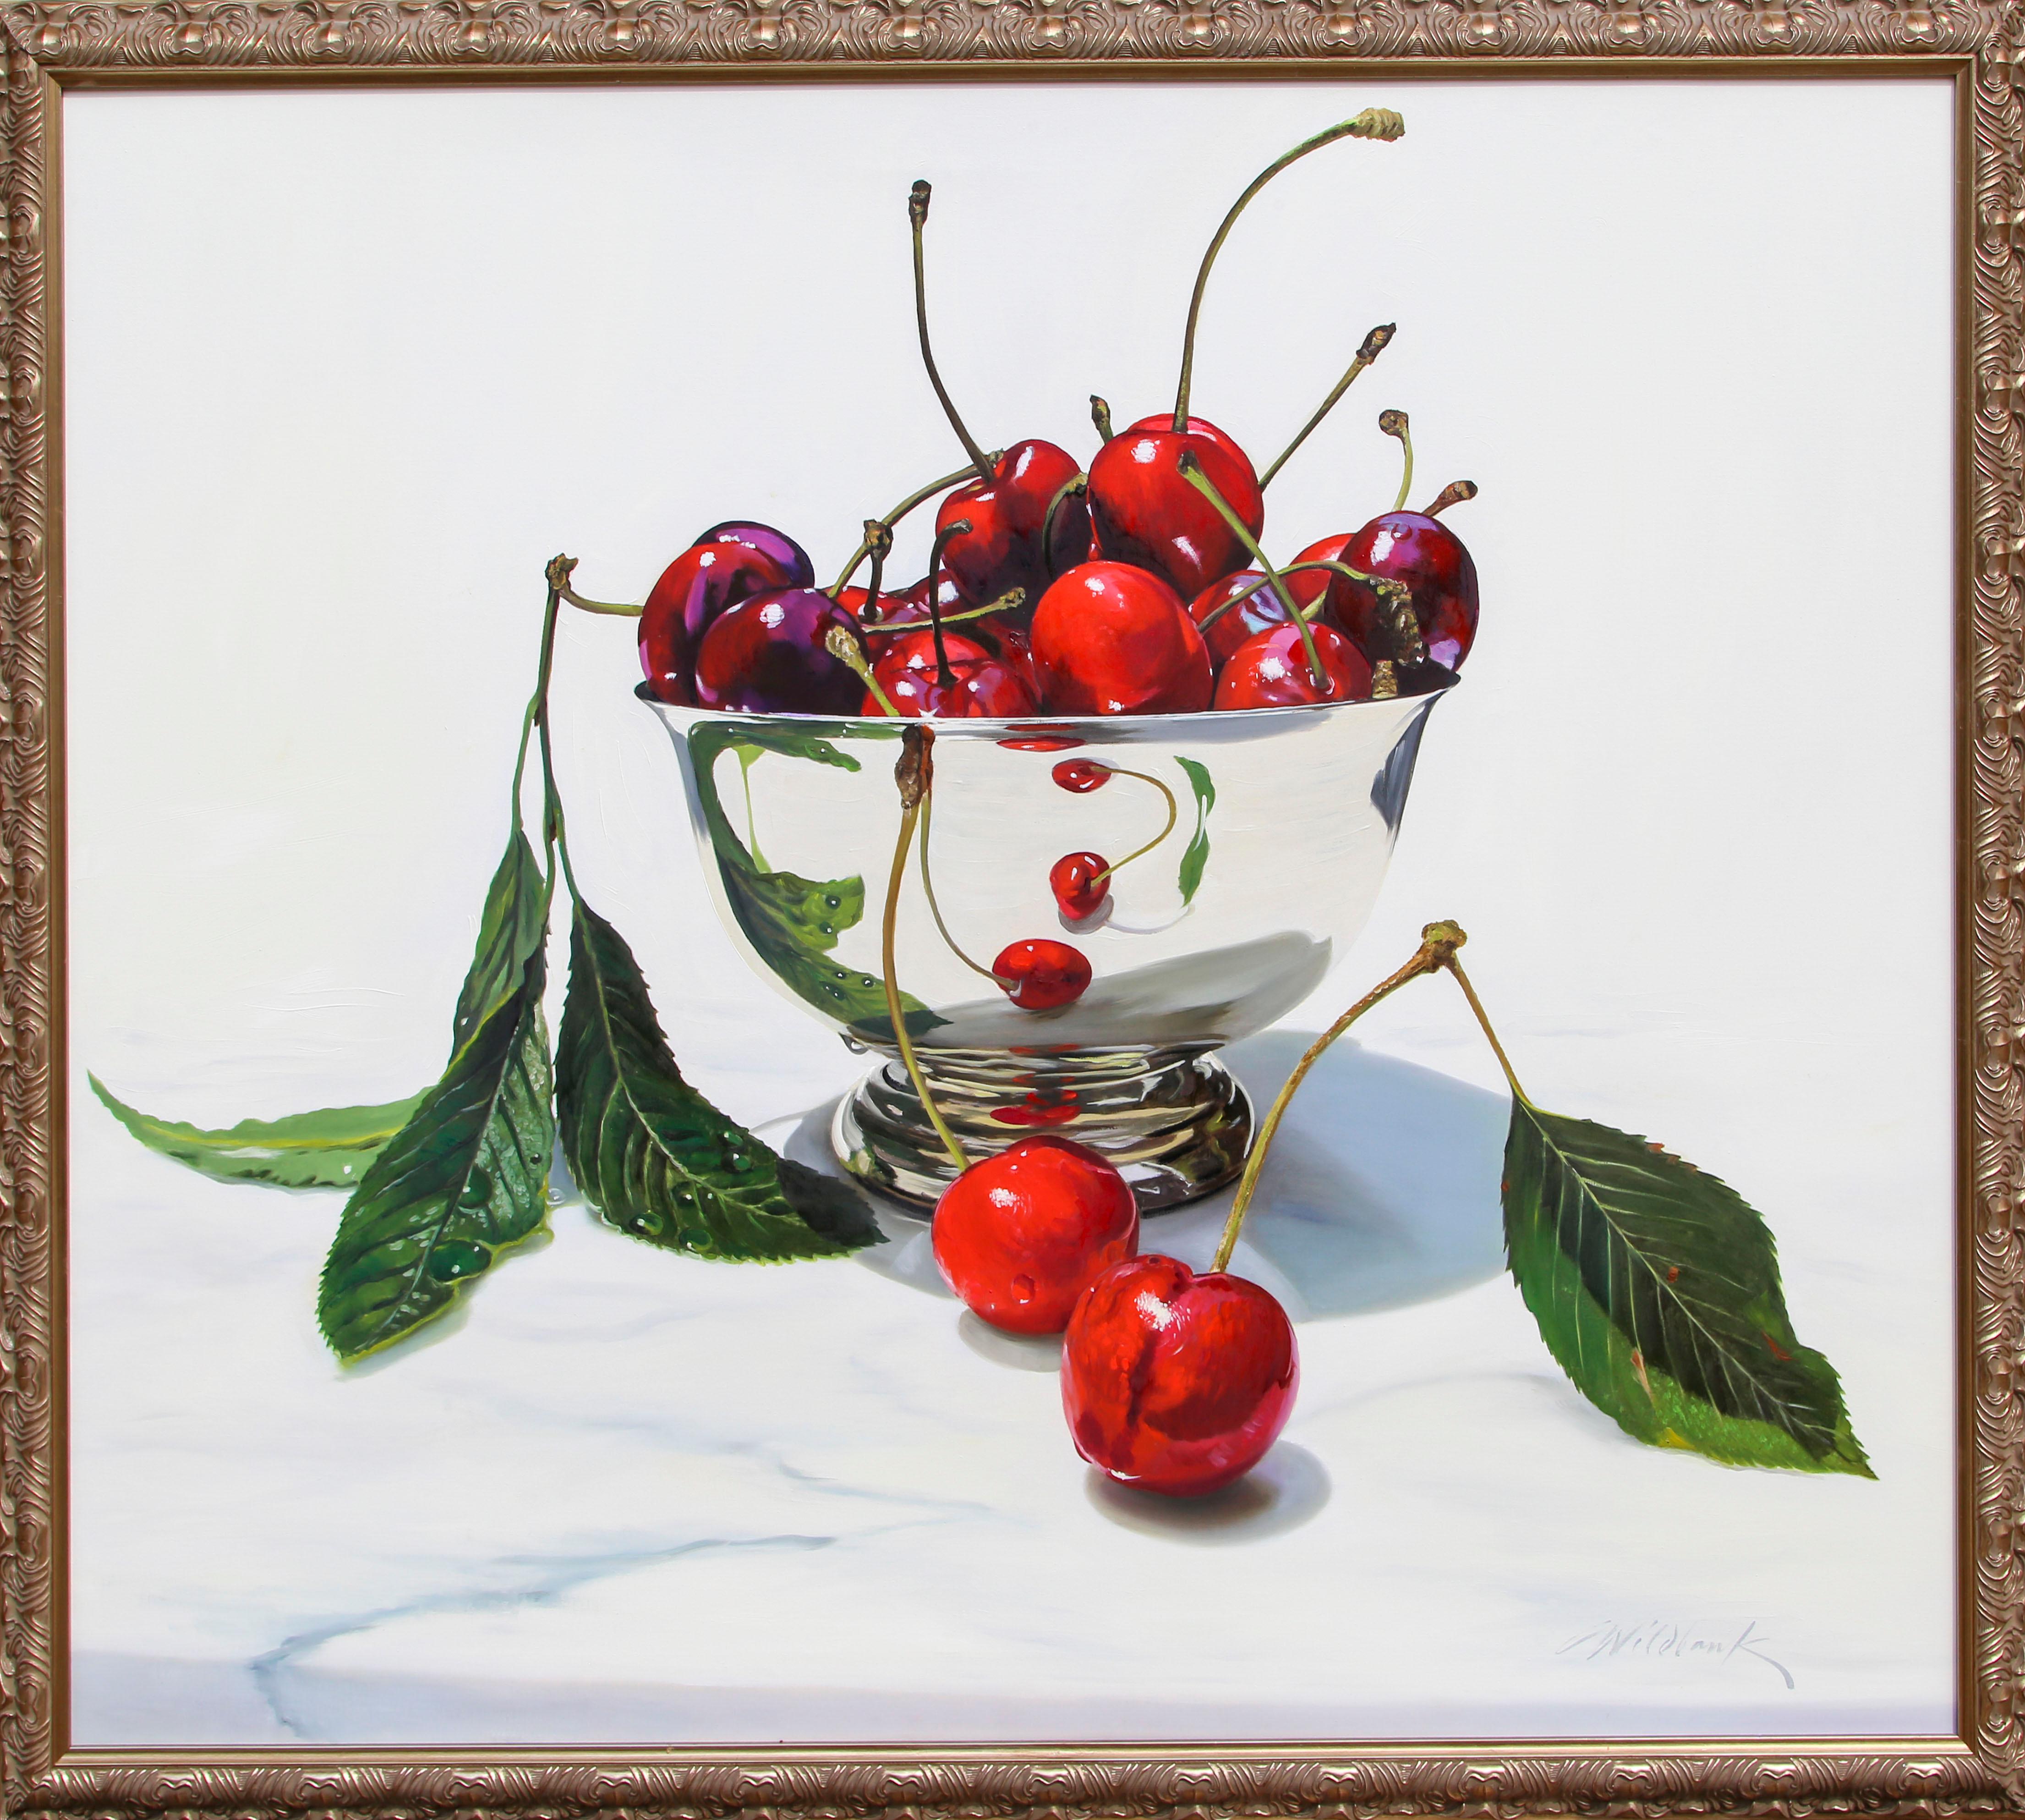 A bright, photorealistic still-life painting of a silver bowl full of cherries, perched atop a white marble surface. The artist has taken immaculate care to preserve the shiny aspects of the fruit and bowl, and even captured it in the waxy surface